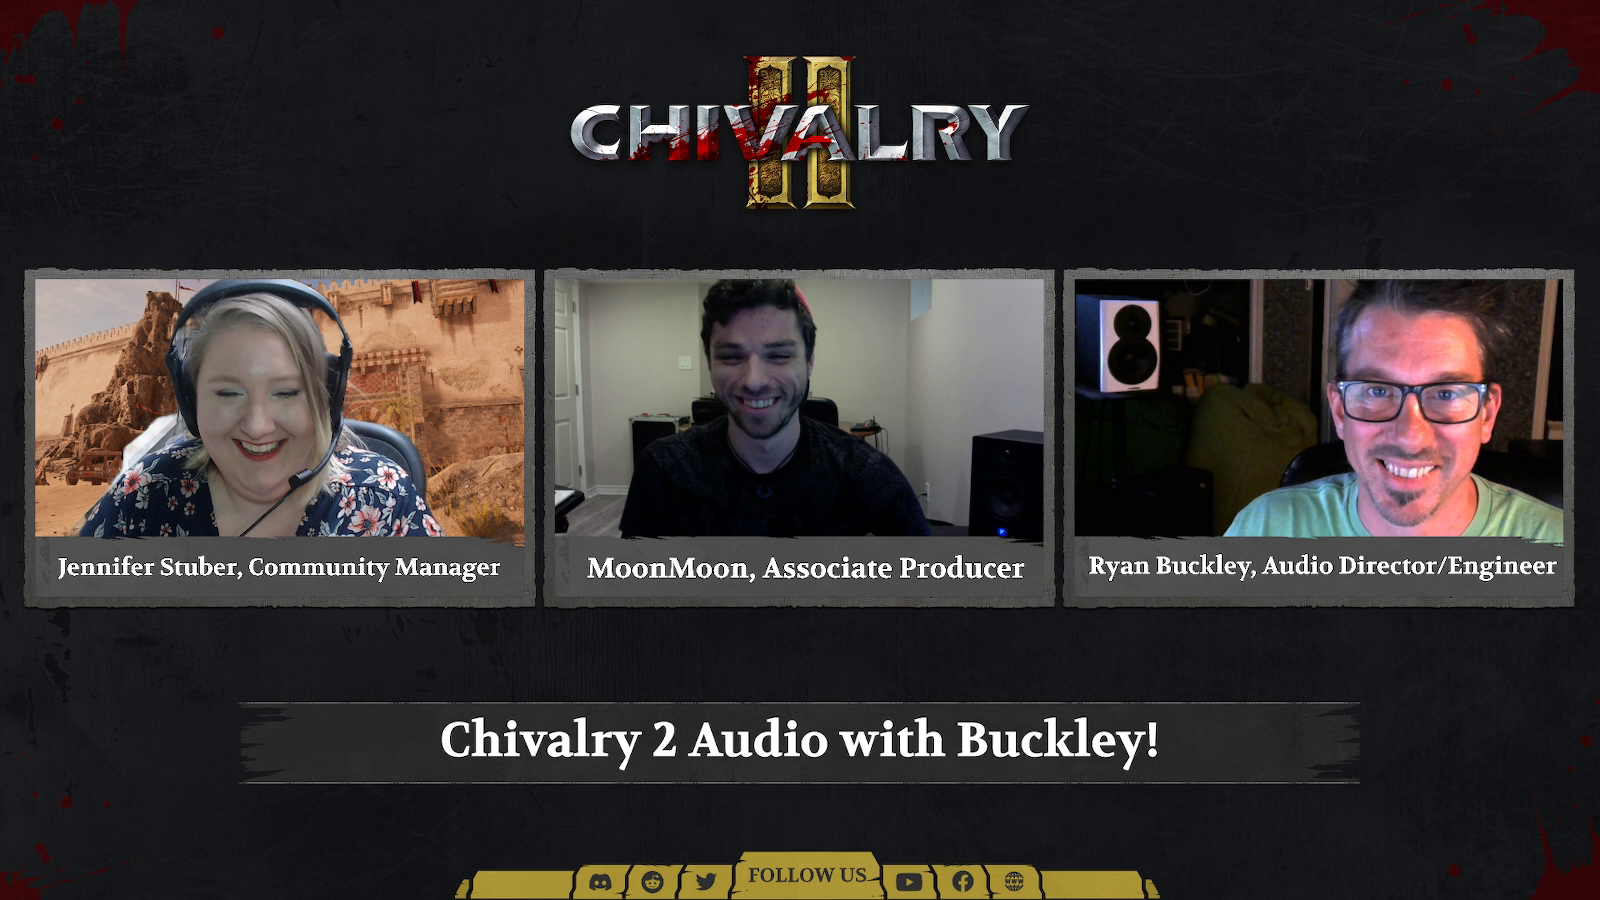 Chivalry 2 Audio with Buckley